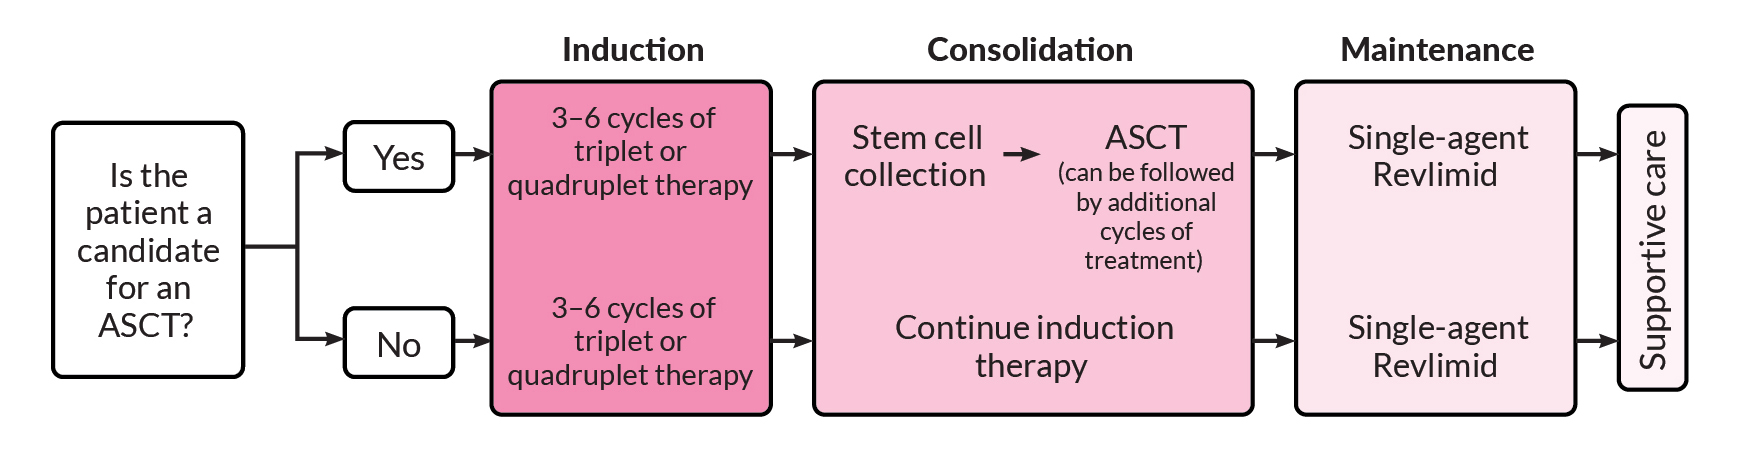 Decision tree for treatment of newly diagnosed multiple myeloma patients. Considerations for induction, consolidation, maintentance, and supportive care.